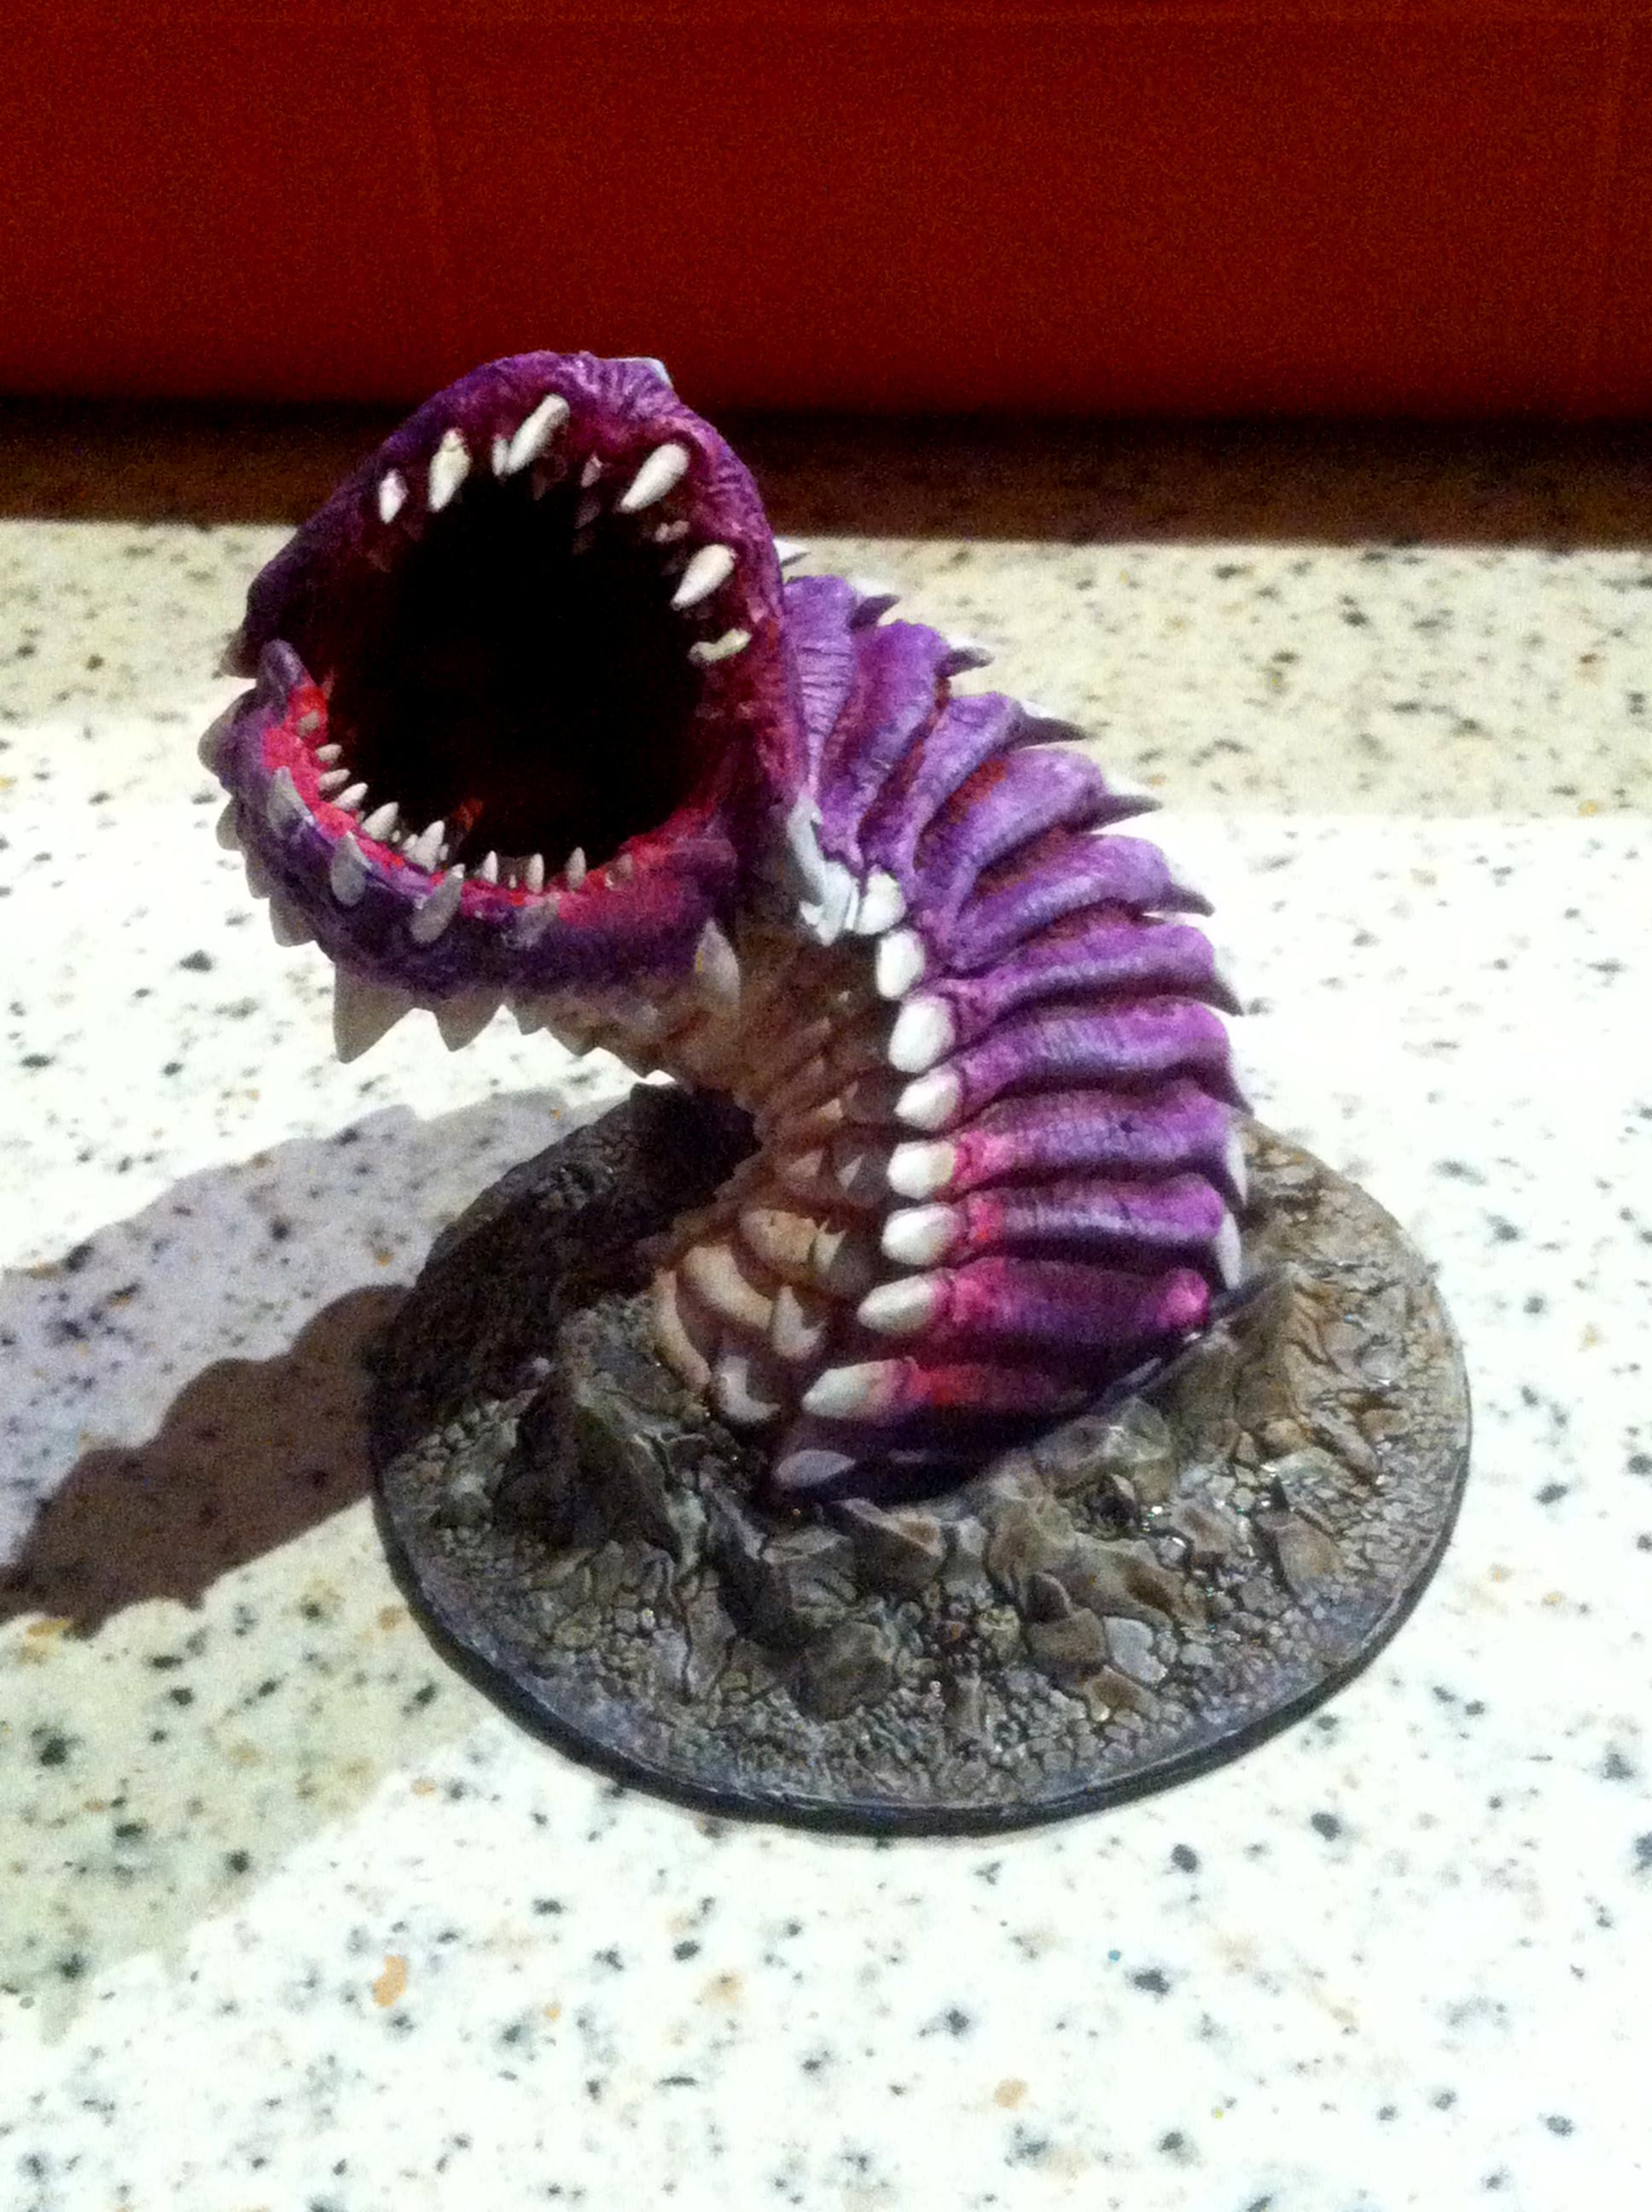 Adventure, Beast, Dungeon, Dungeons And Dragons, Monster, Purple, Worm